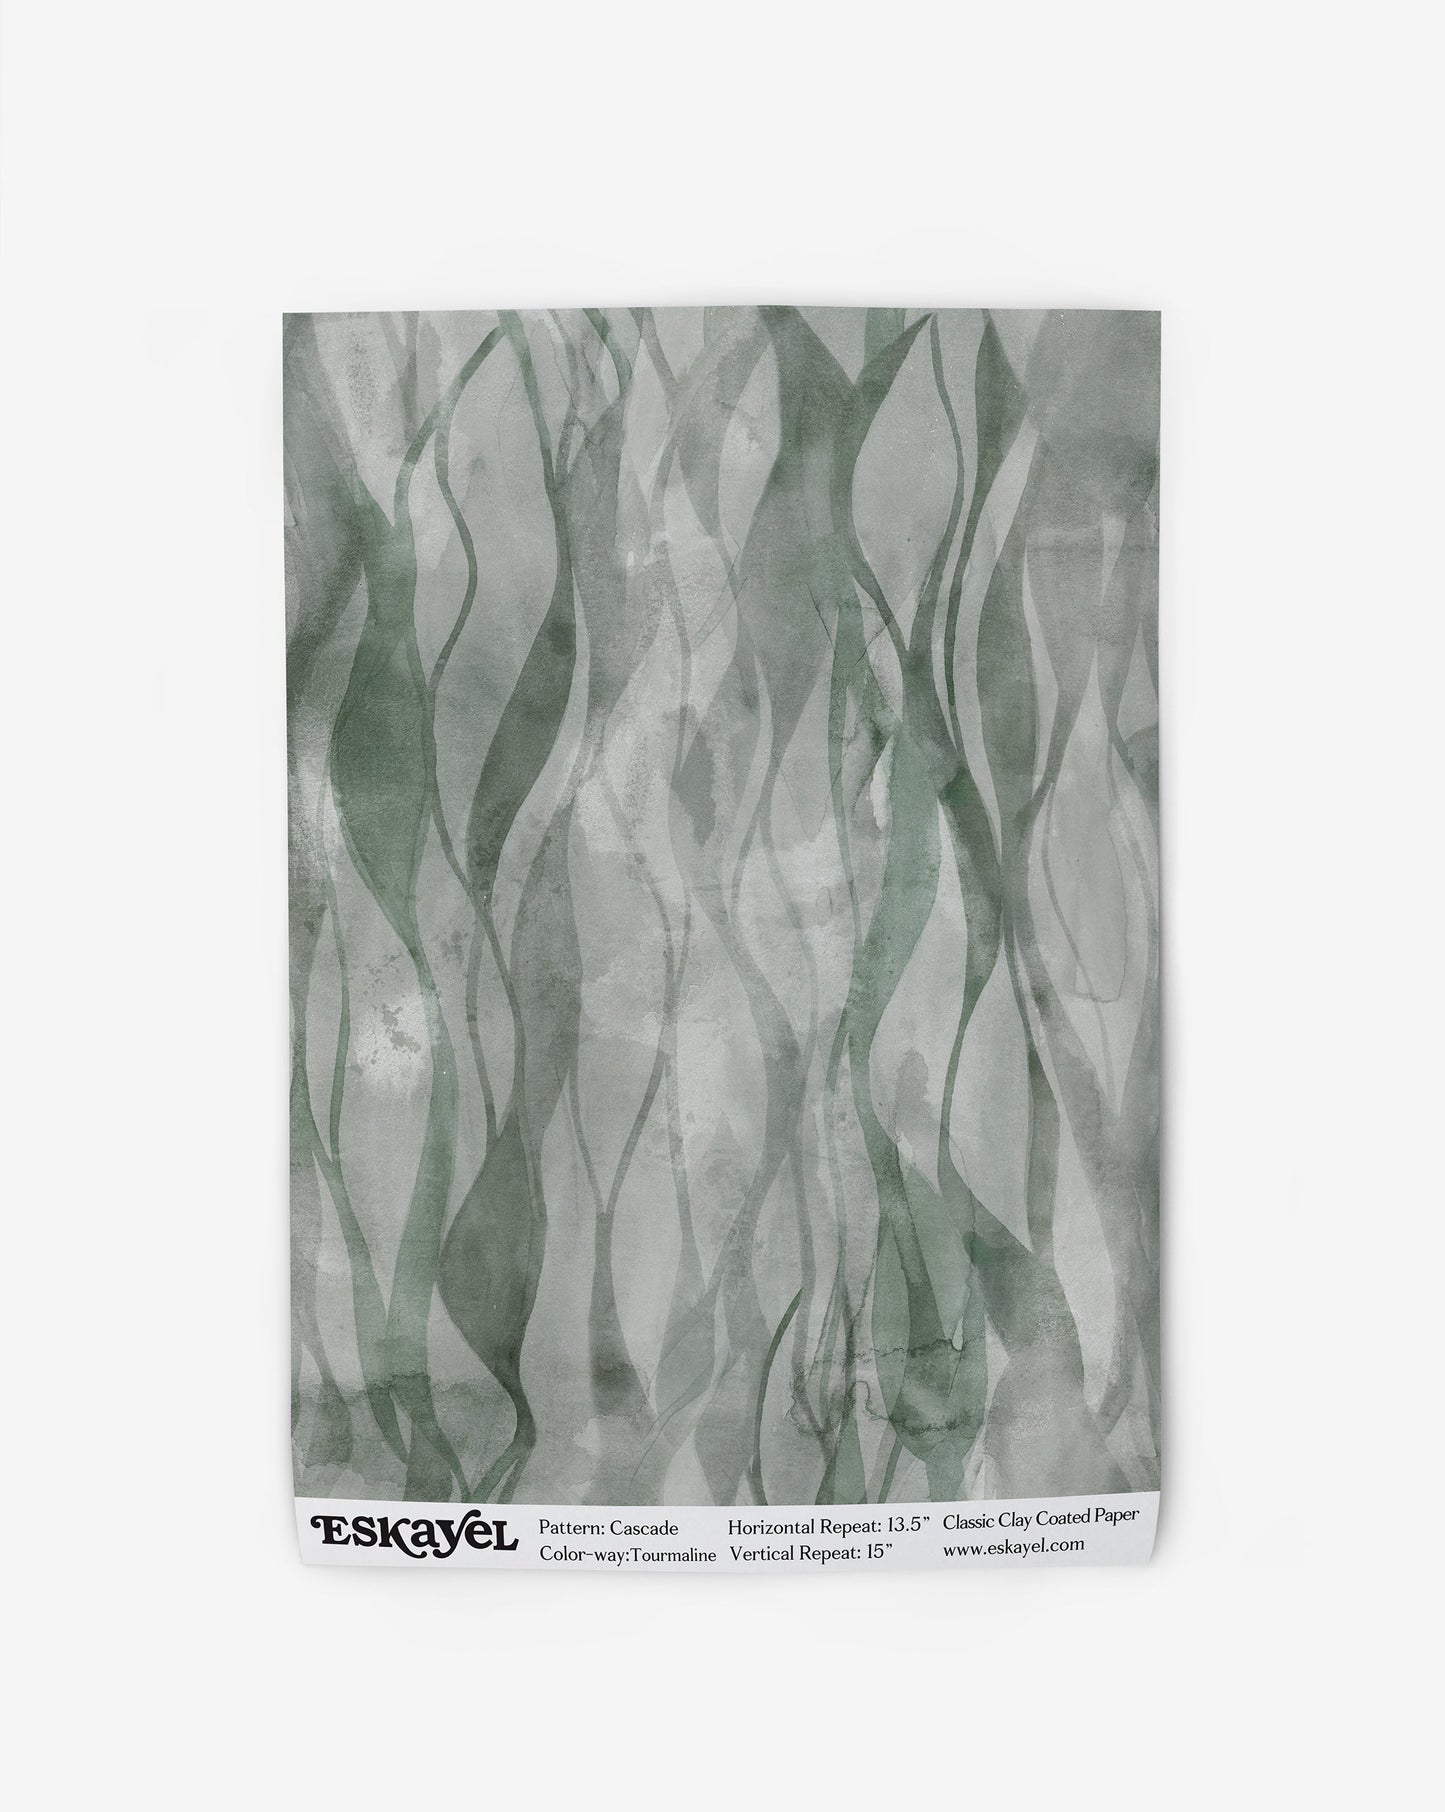 Cascade Wallpaper Sample in the color way tourmaline in shades of green.